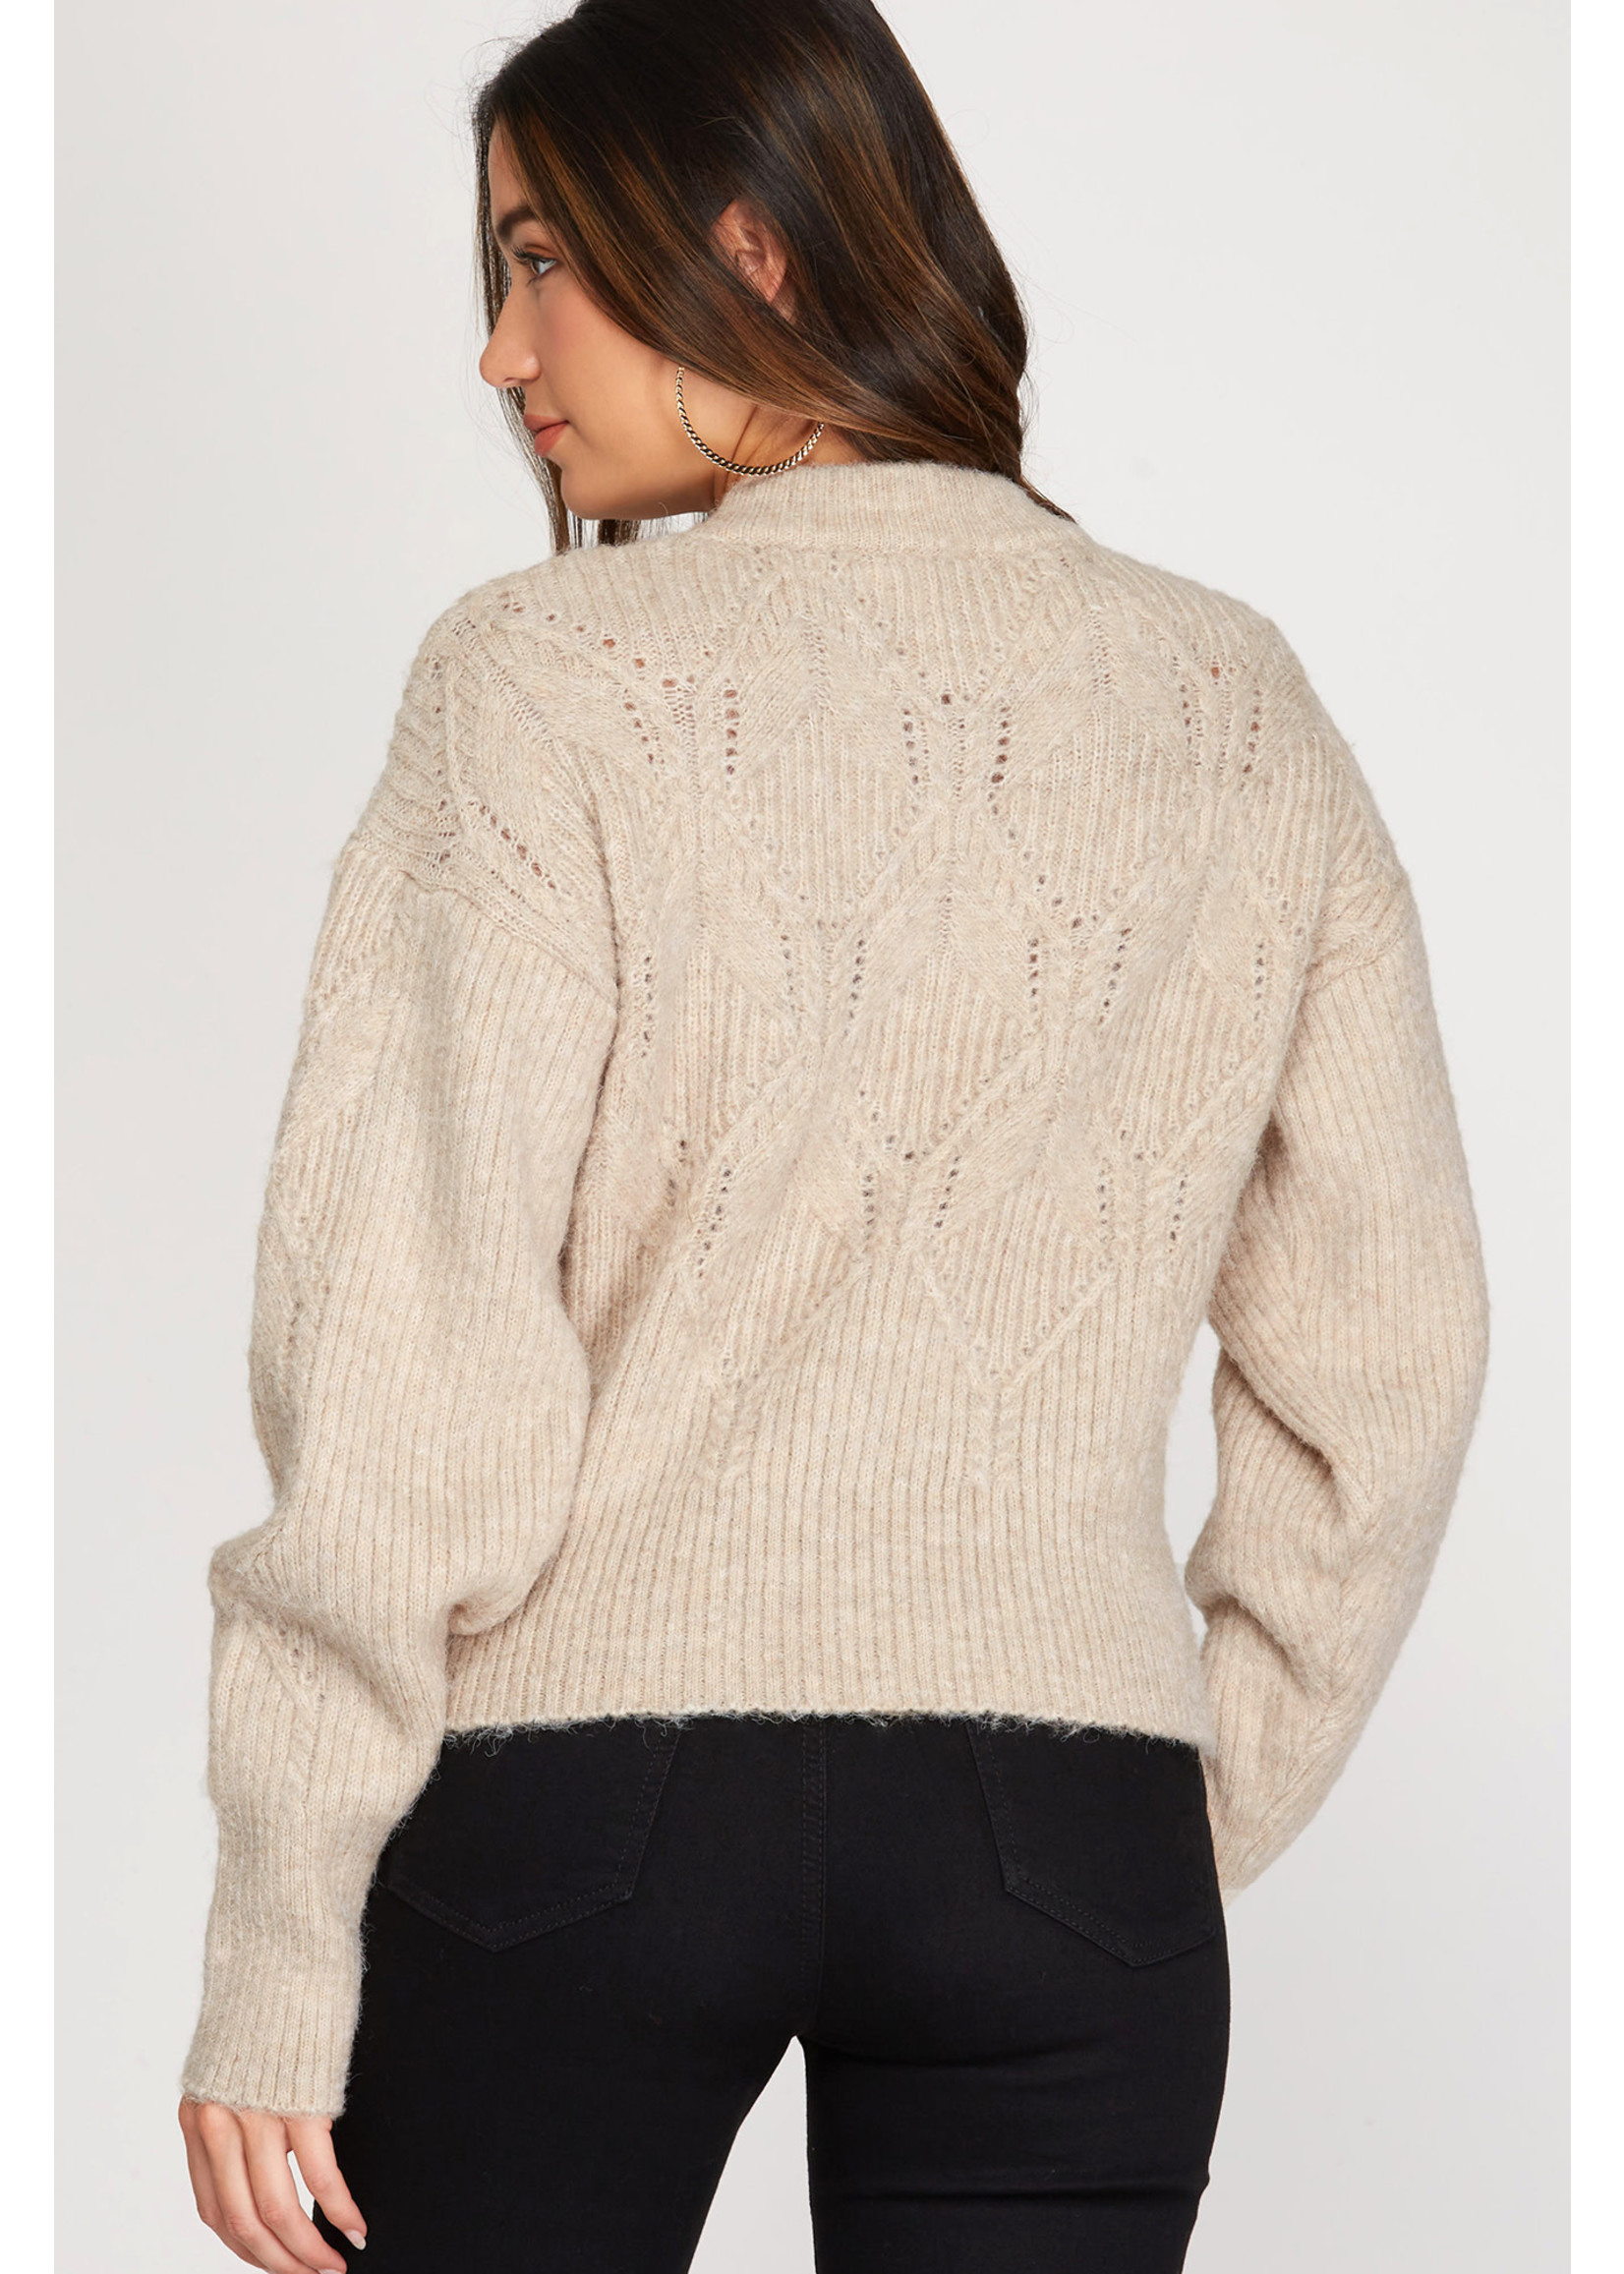 EM & ELLE Lily Cable Knit Sweater